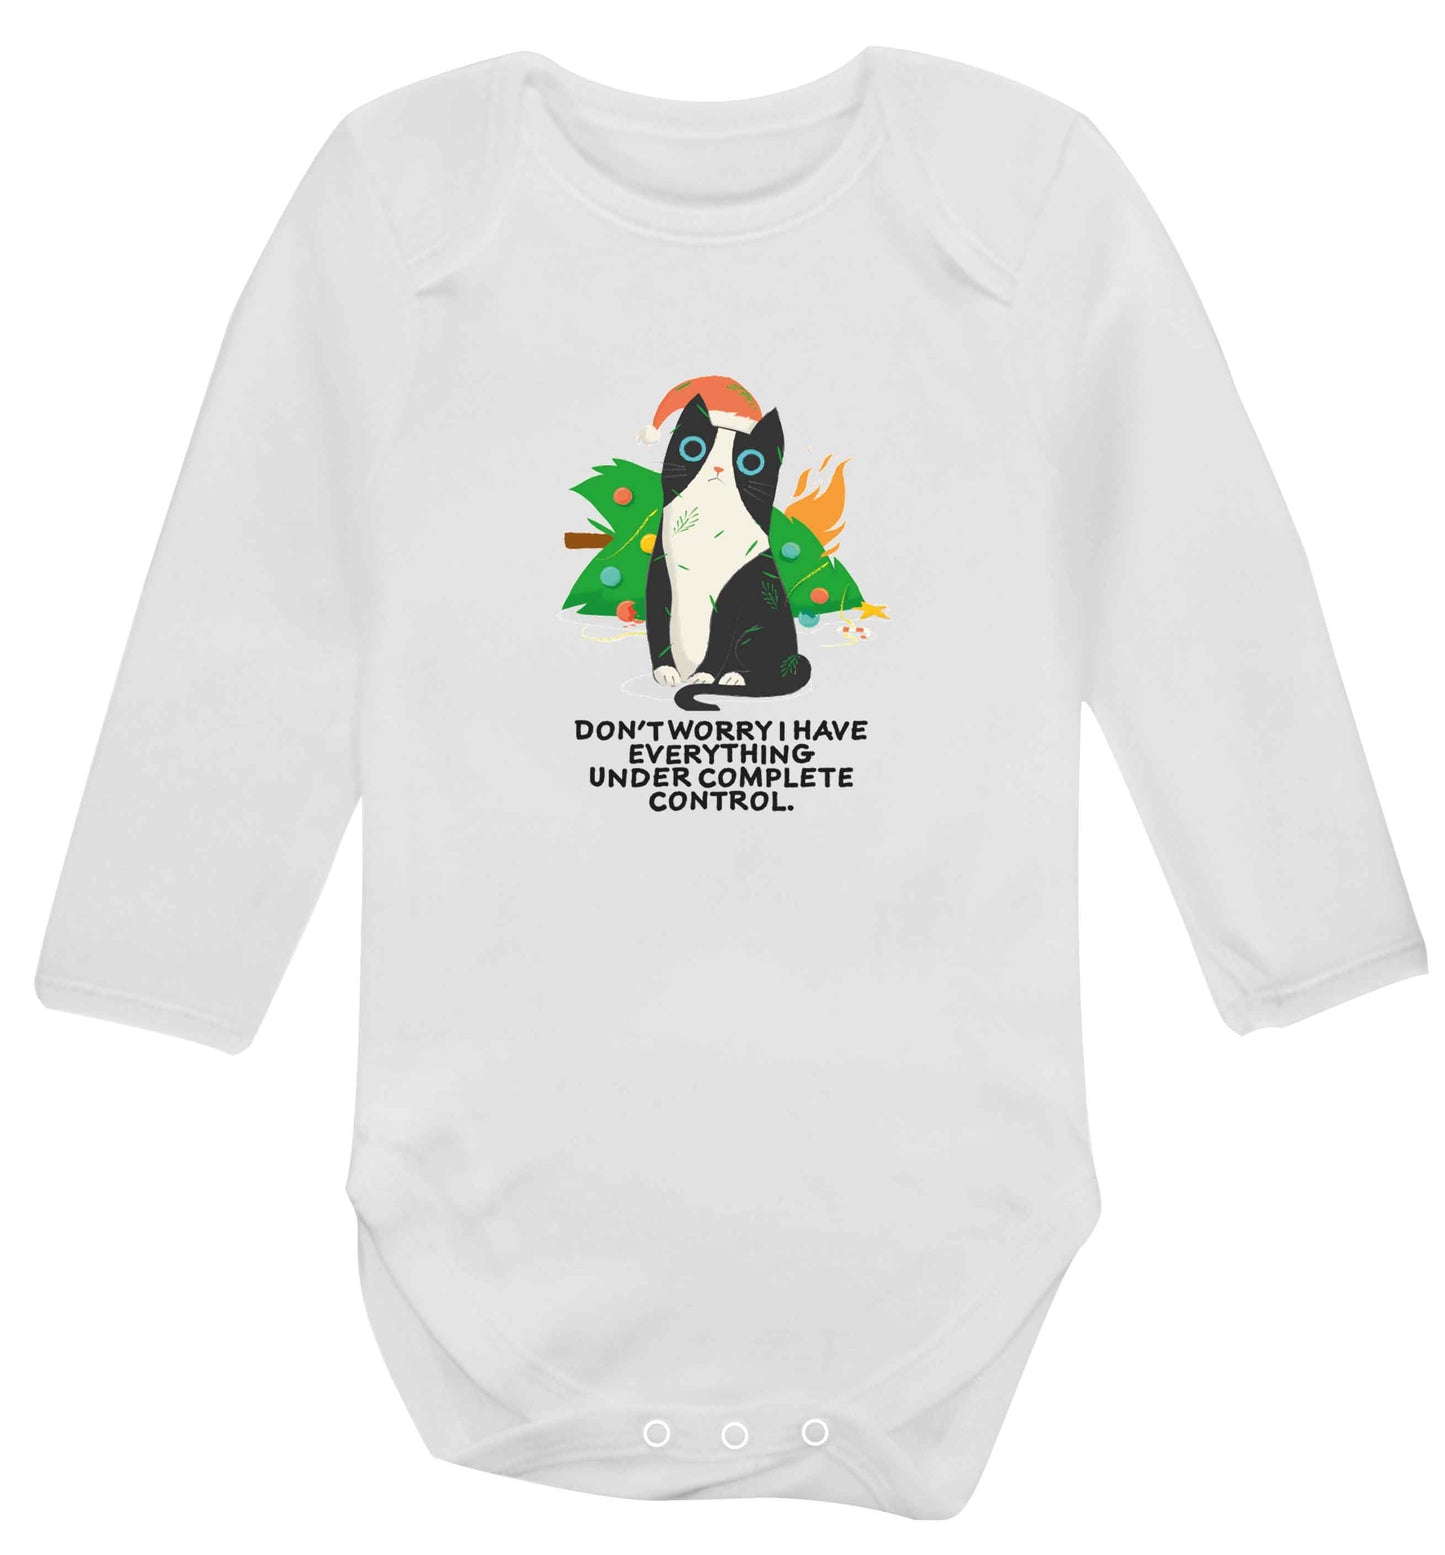 Don't worry I have everything under complete control baby vest long sleeved white 6-12 months